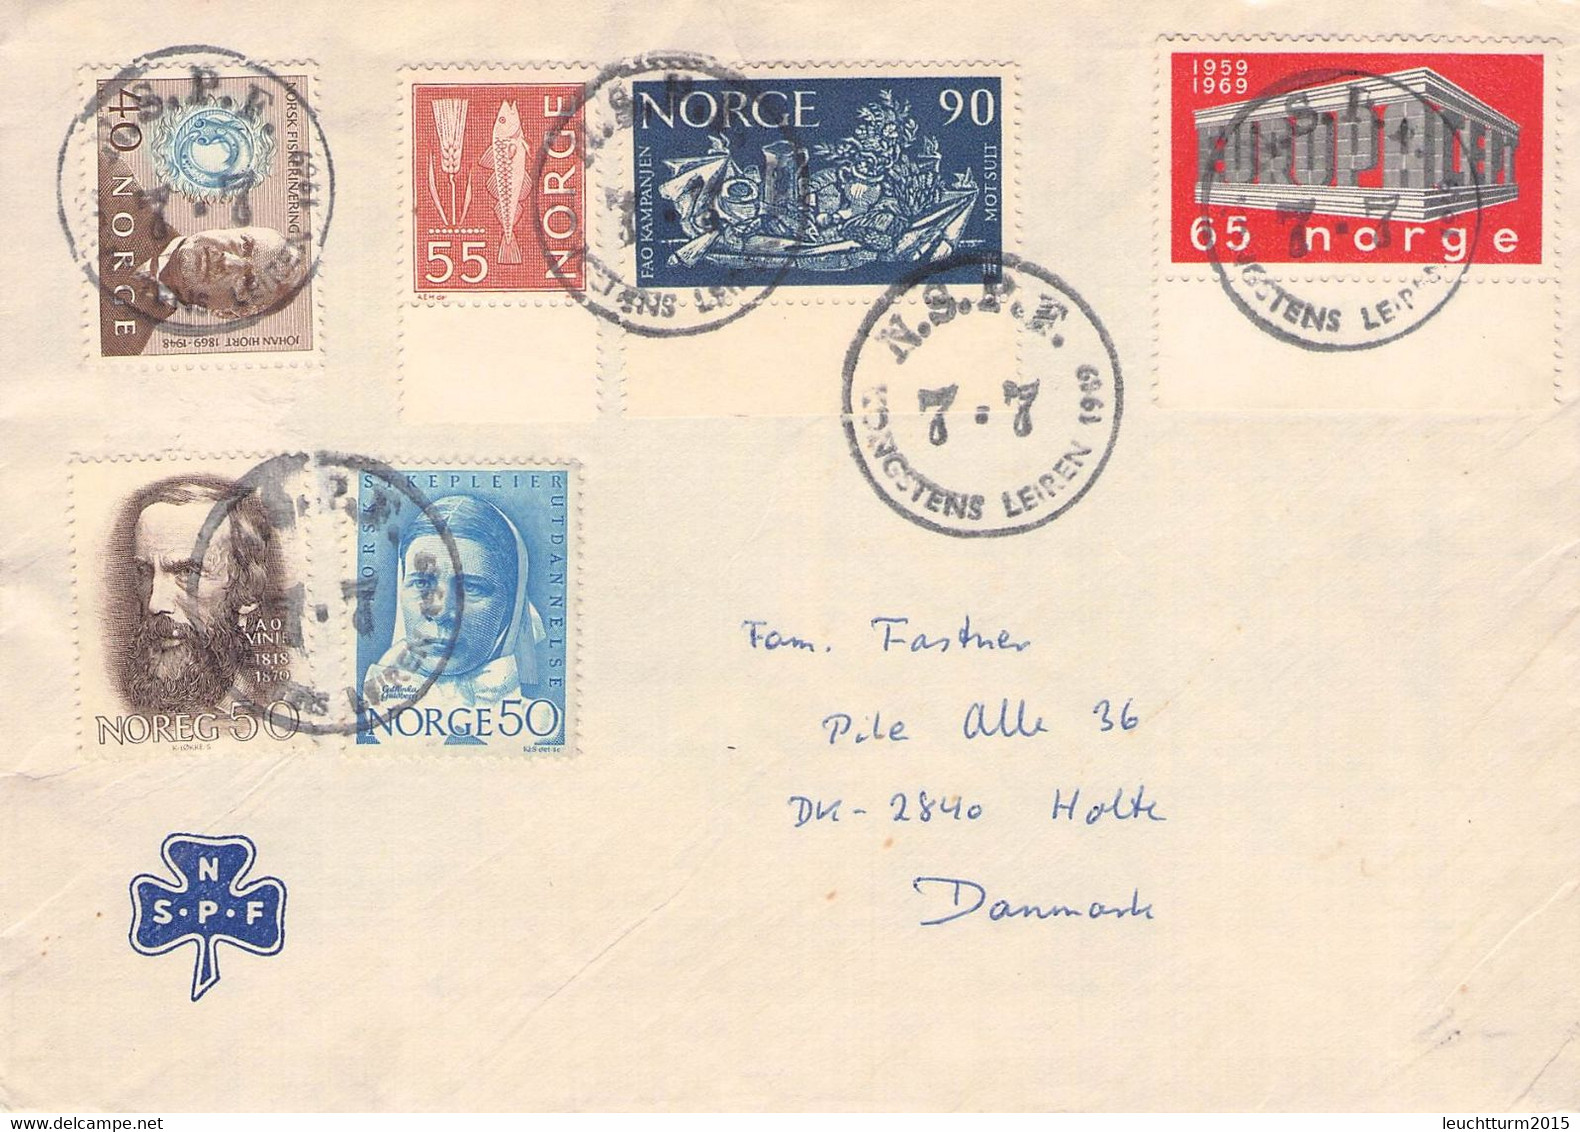 NORWAY - SCOUT SCOOTING 1969 LETTER > HOLTE/DK //QE 235 - Storia Postale